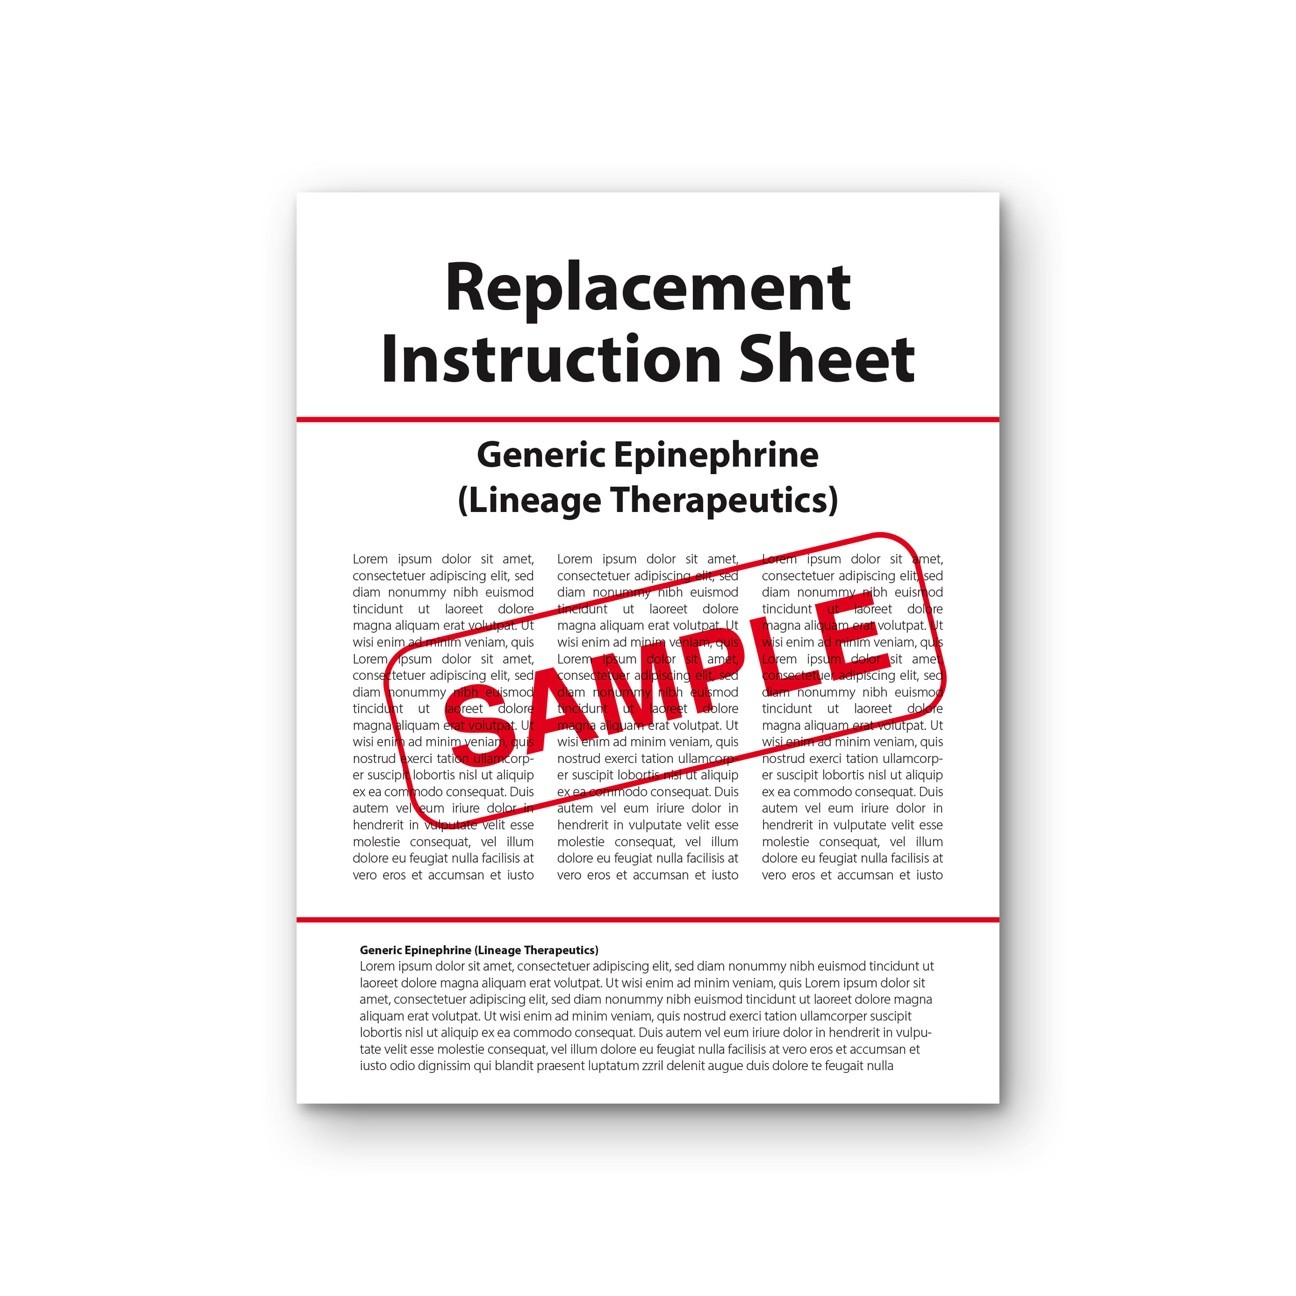 Replacement Instruction Sheet – Generic Epinephrine (Lineage Therapeutics)